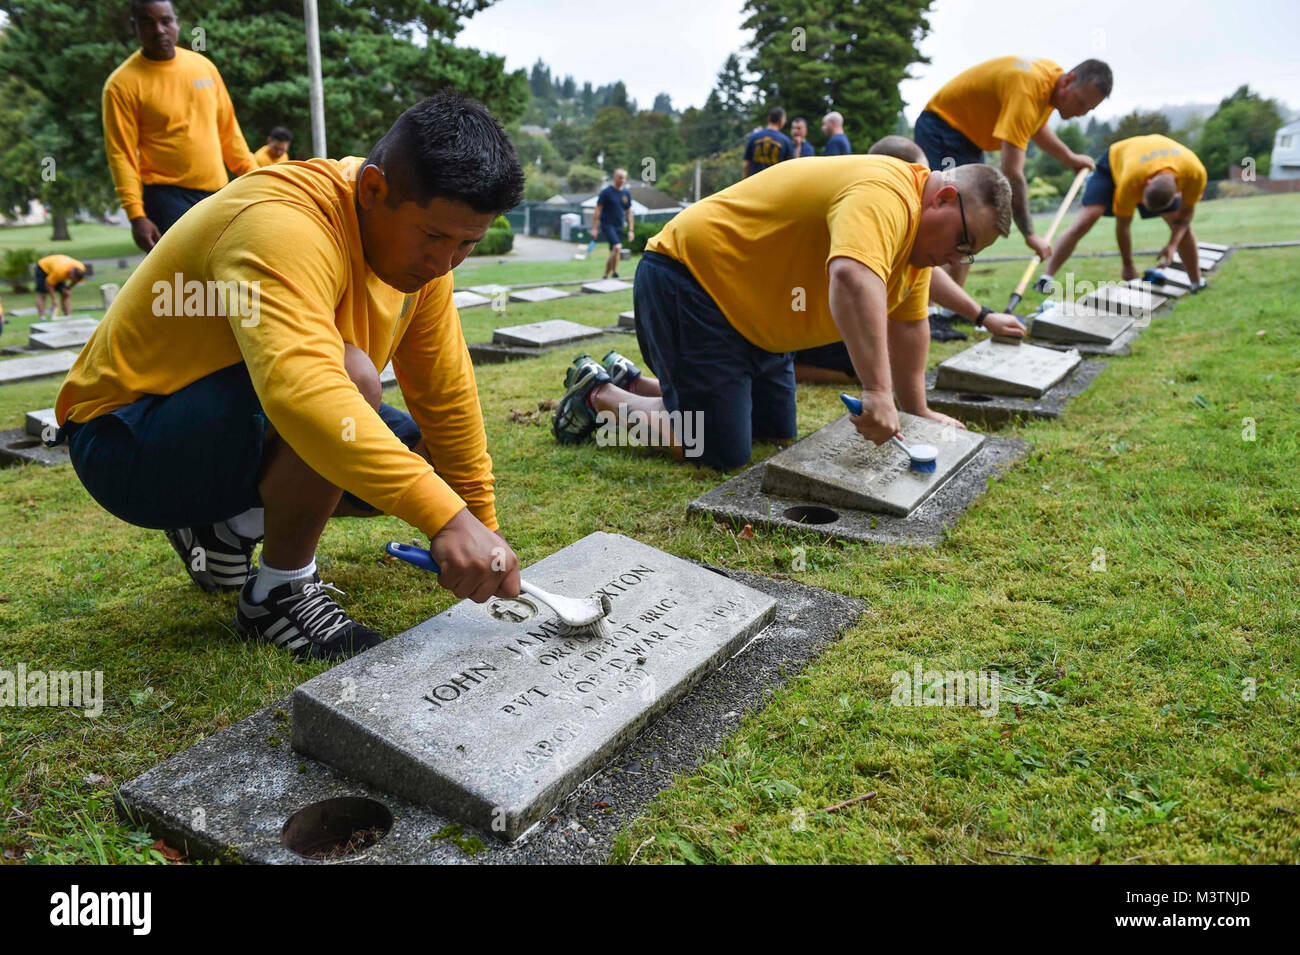 160816-N-OO032-026 BREMERTON, Wash. (Aug. 16, 2016) – Chief Aviation Maintenance Administrationman (Select) Dylar McCulley (left), from Kenmore, Washington, and stationed with USS Nimitz (CVN 68), cleans a head stone alongside fellow Pacific Northwest chief petty officer selects during a community relations event at Ivy Green Cemetery as part of the USS Turner Joy (DD 951) Legacy Academy. The academy entails living aboard the Vietnam-era destroyer while participating in community relation projects, ship preservation, leadership training, and a naval heritage capstone project. The Turner Joy is Stock Photo